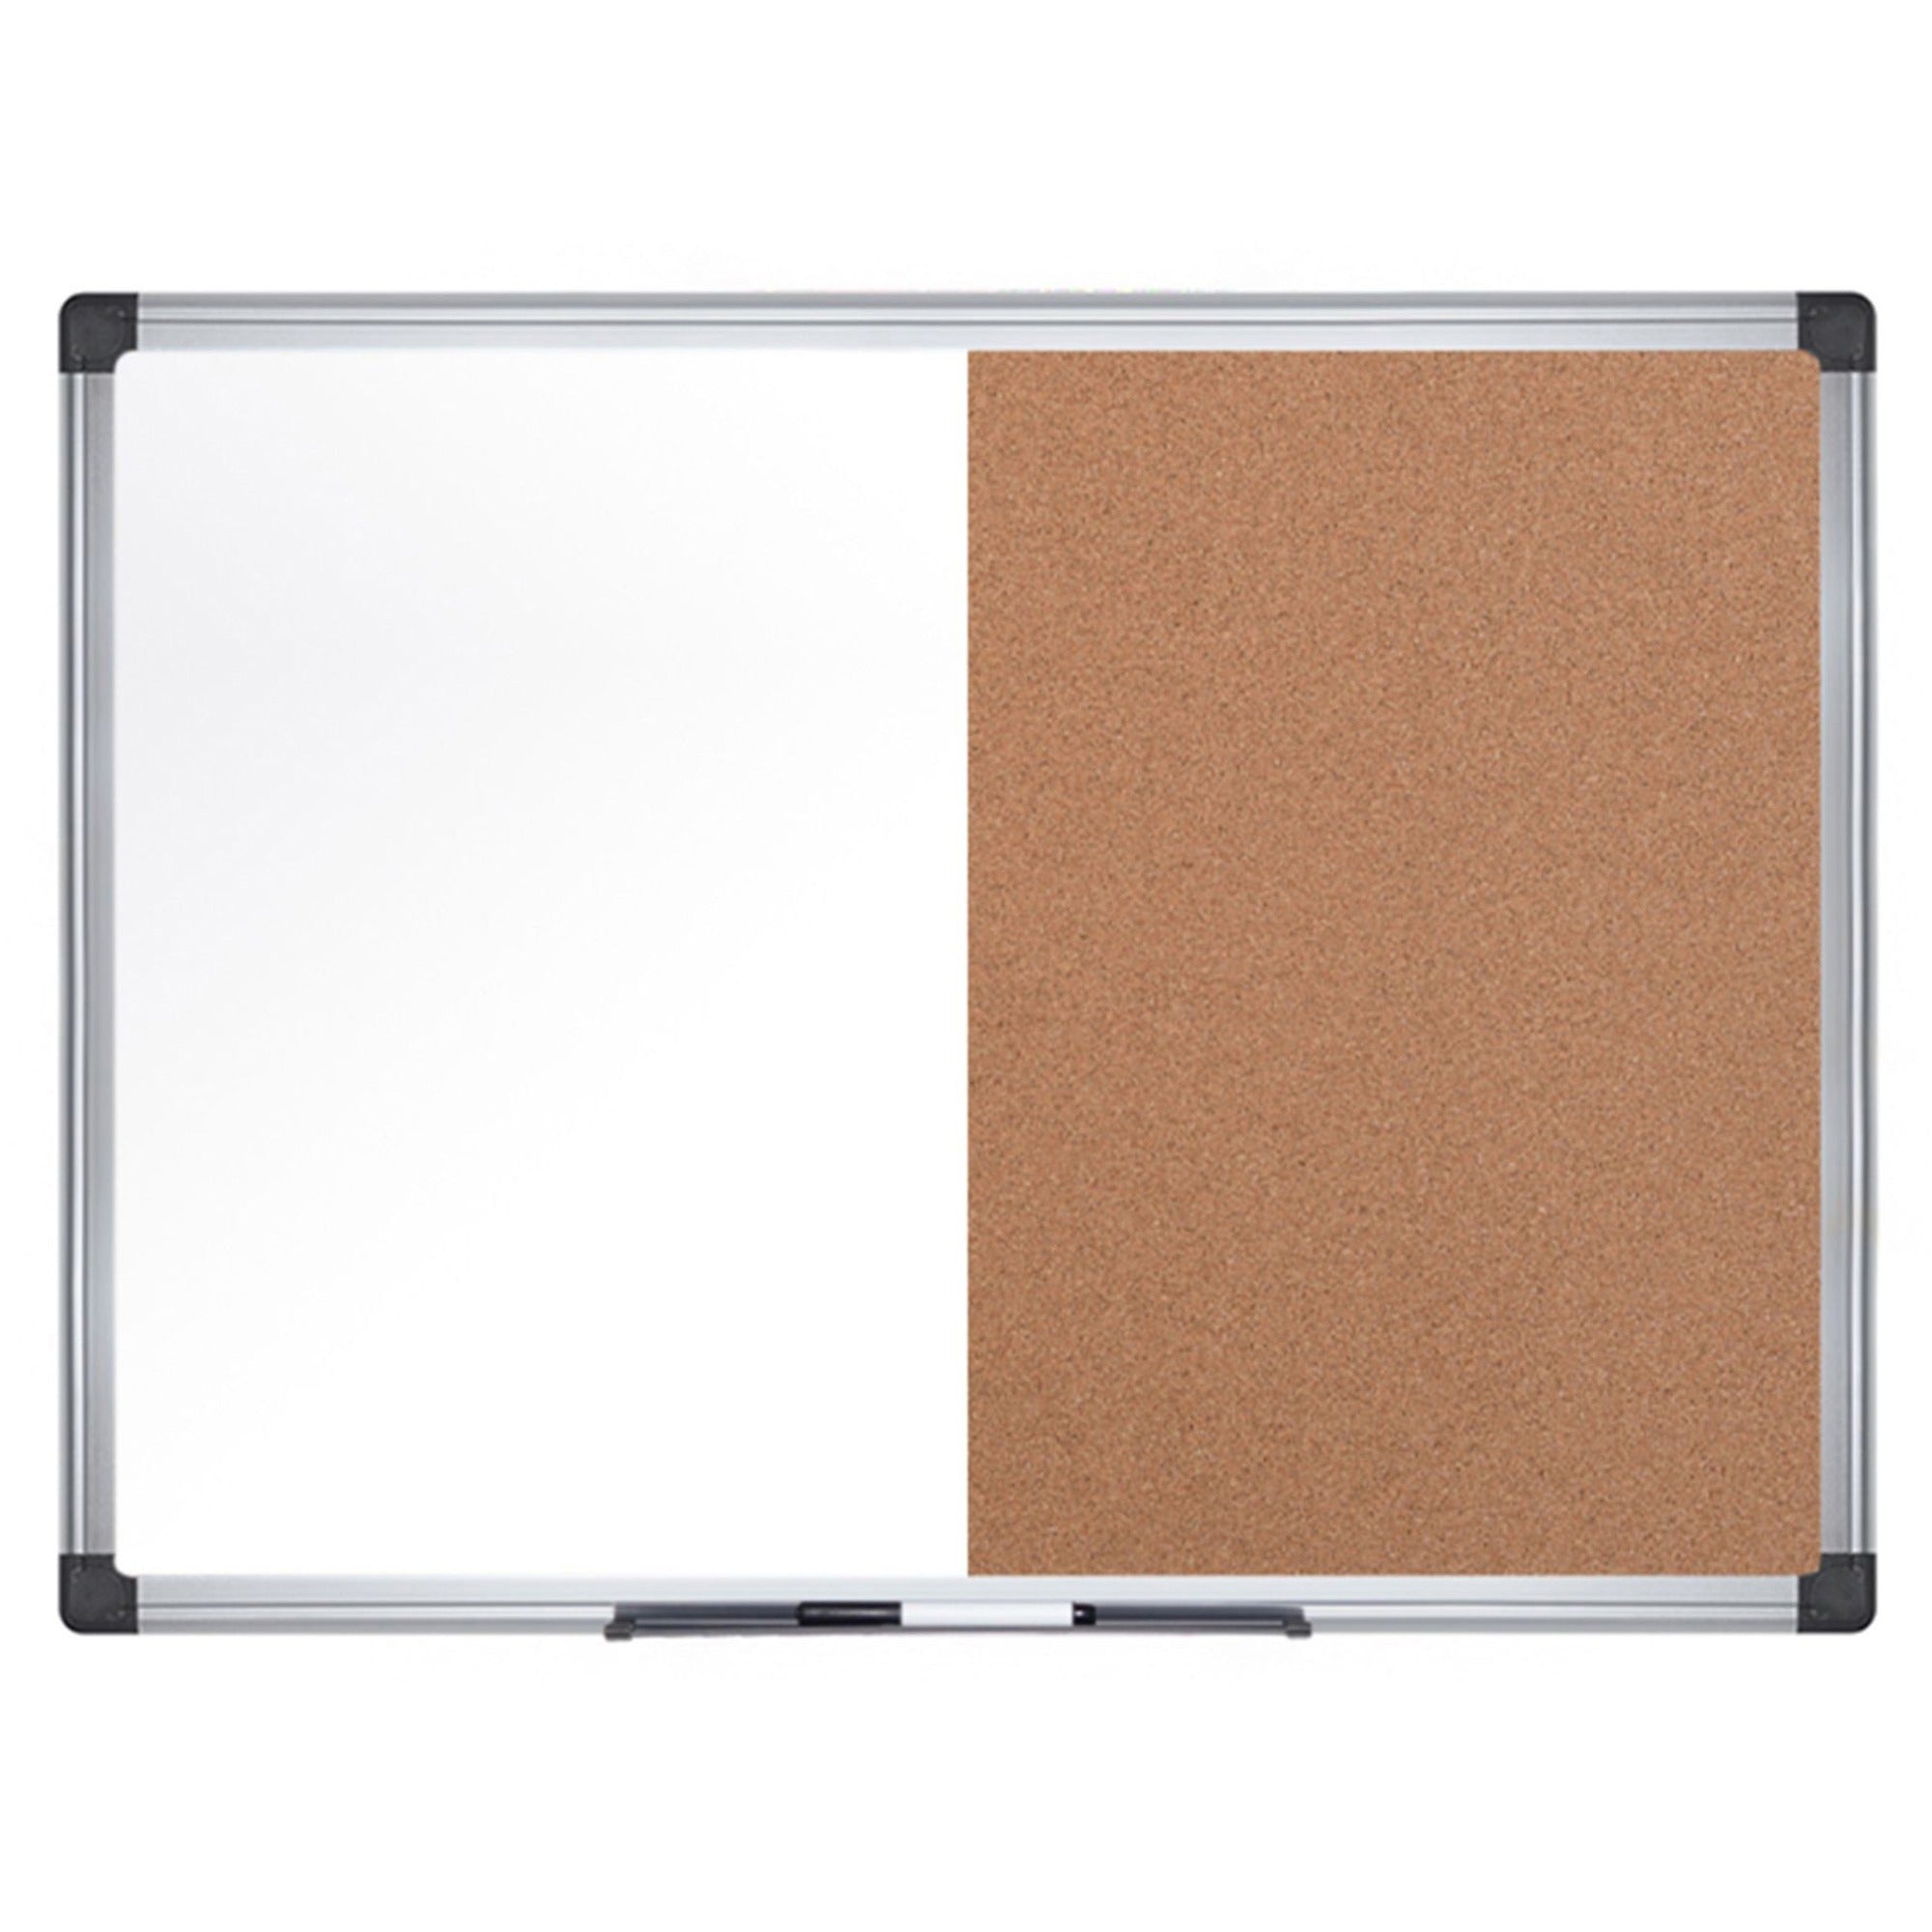 mastervision-dry-erase-combo-board-050-height-x-36-width-x-48-depth-natural-cork-melamine-surface-self-healing-resilient-easy-to-clean-dry-erase-surface-durable-silver-aluminum-frame-1-each-taa-compliant_bvcxa0502170 - 1